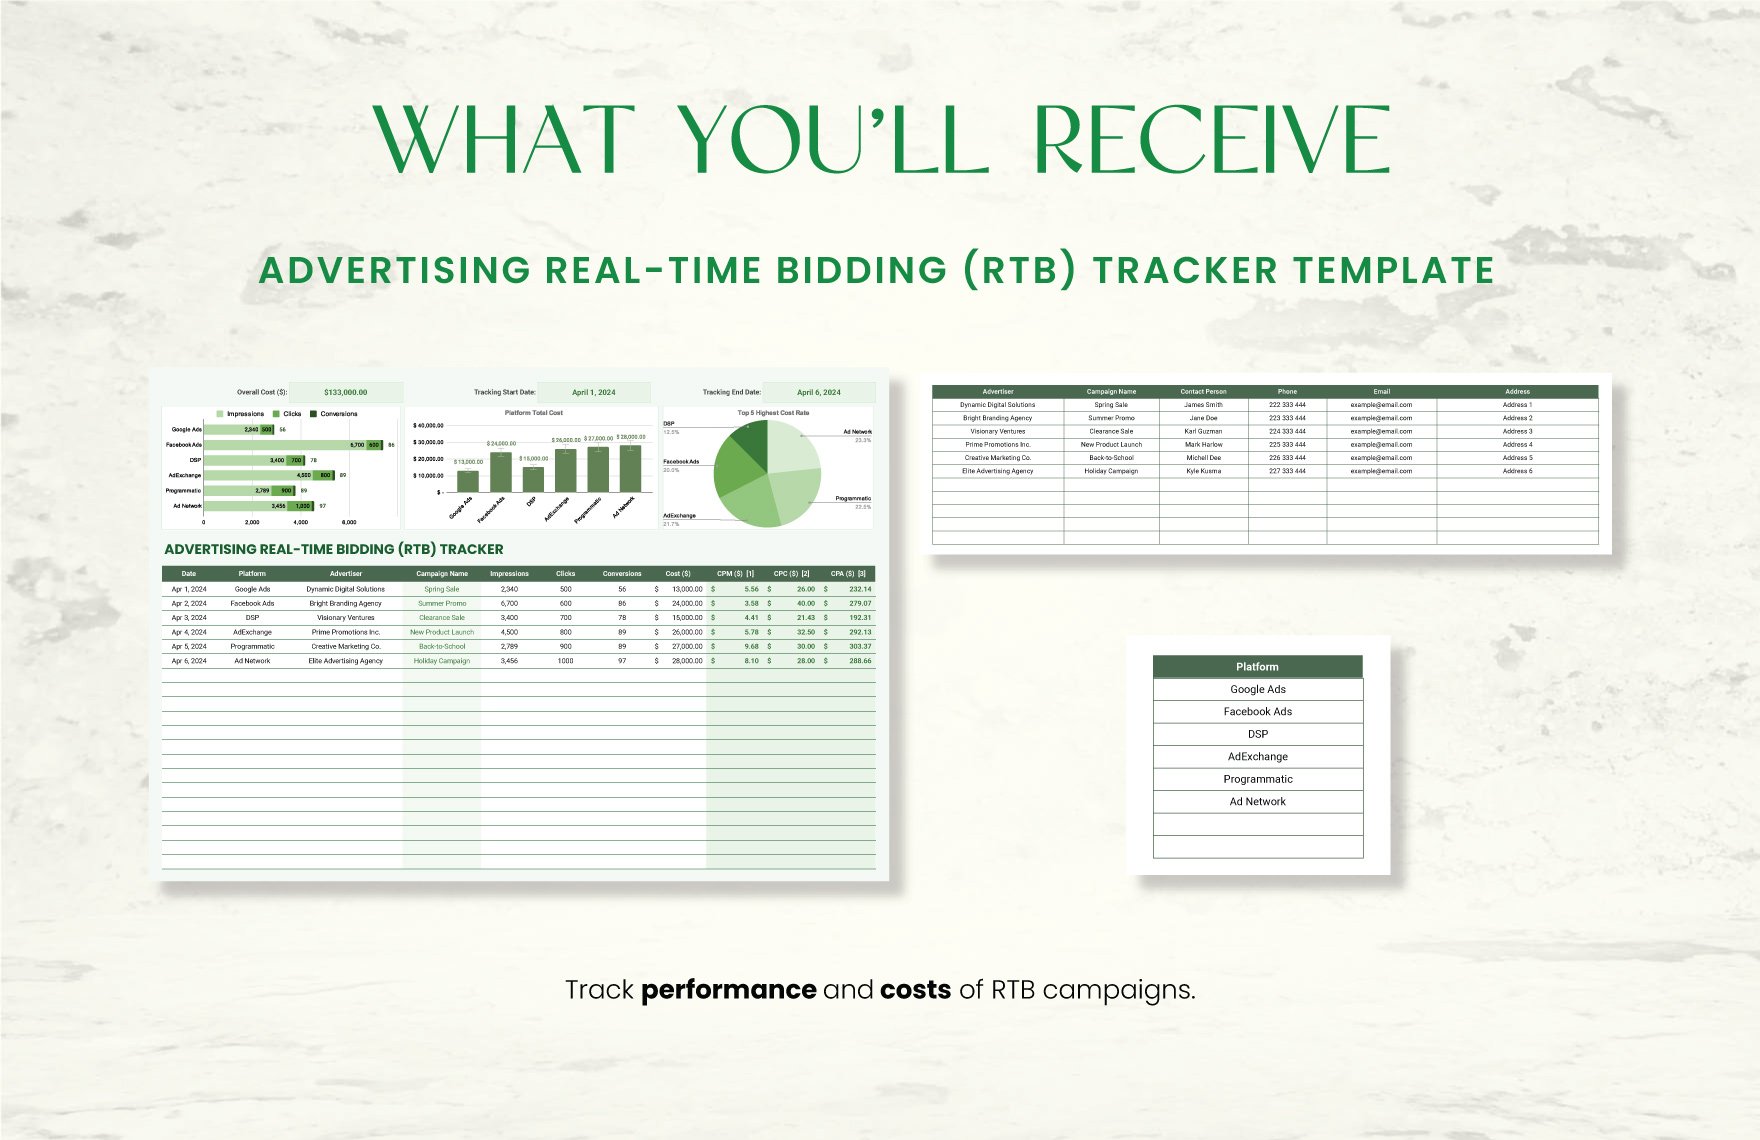 Advertising Real-Time Bidding (RTB) Tracker Template